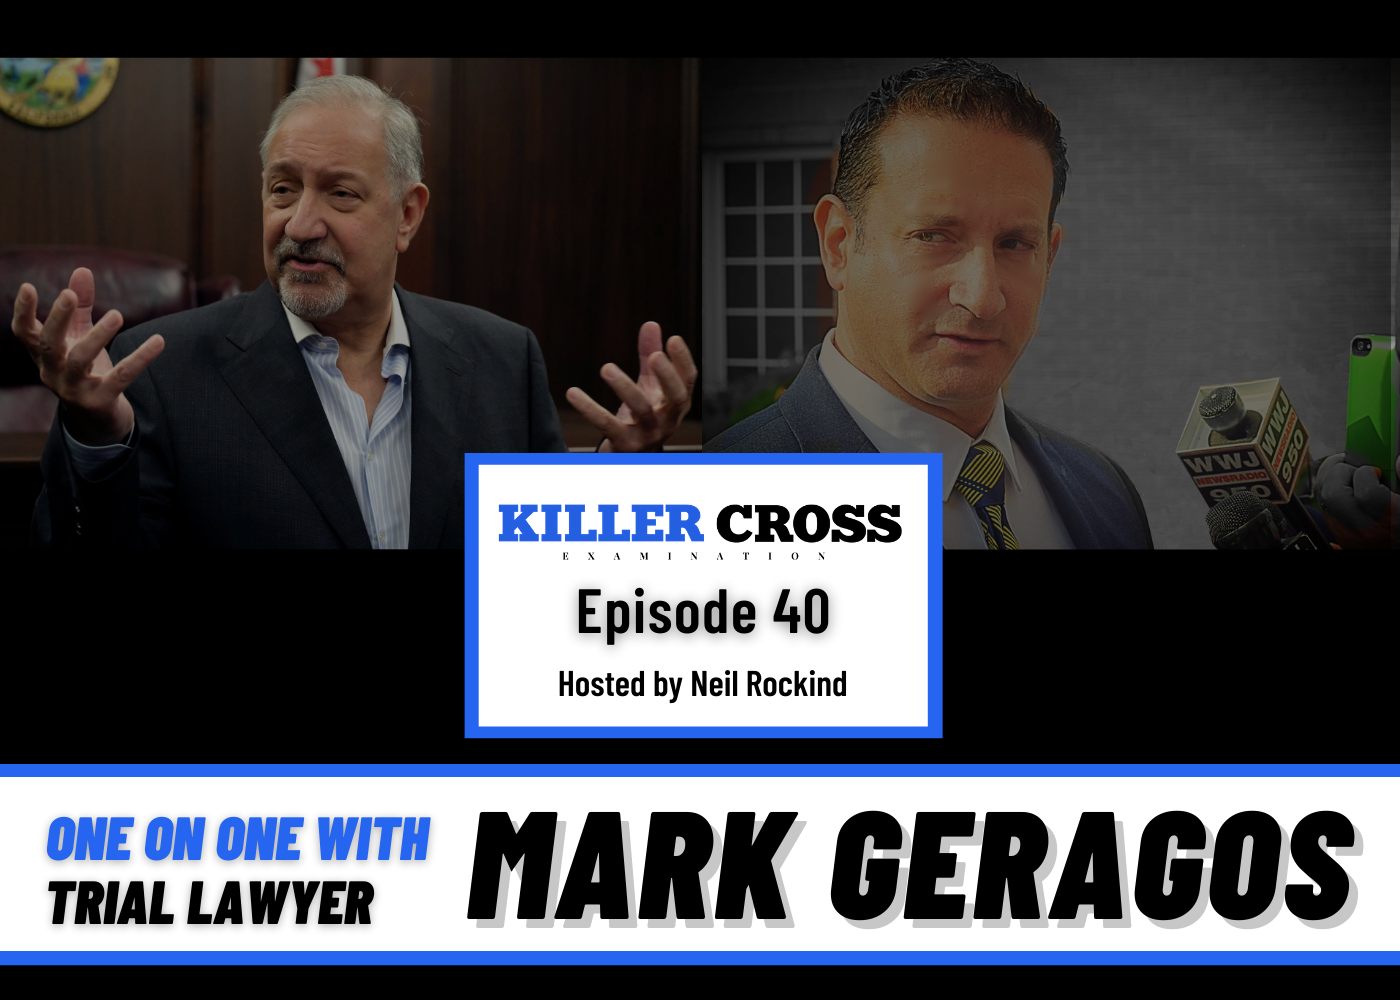 Episode 40: One on One with Trial Lawyer Mark Geragos